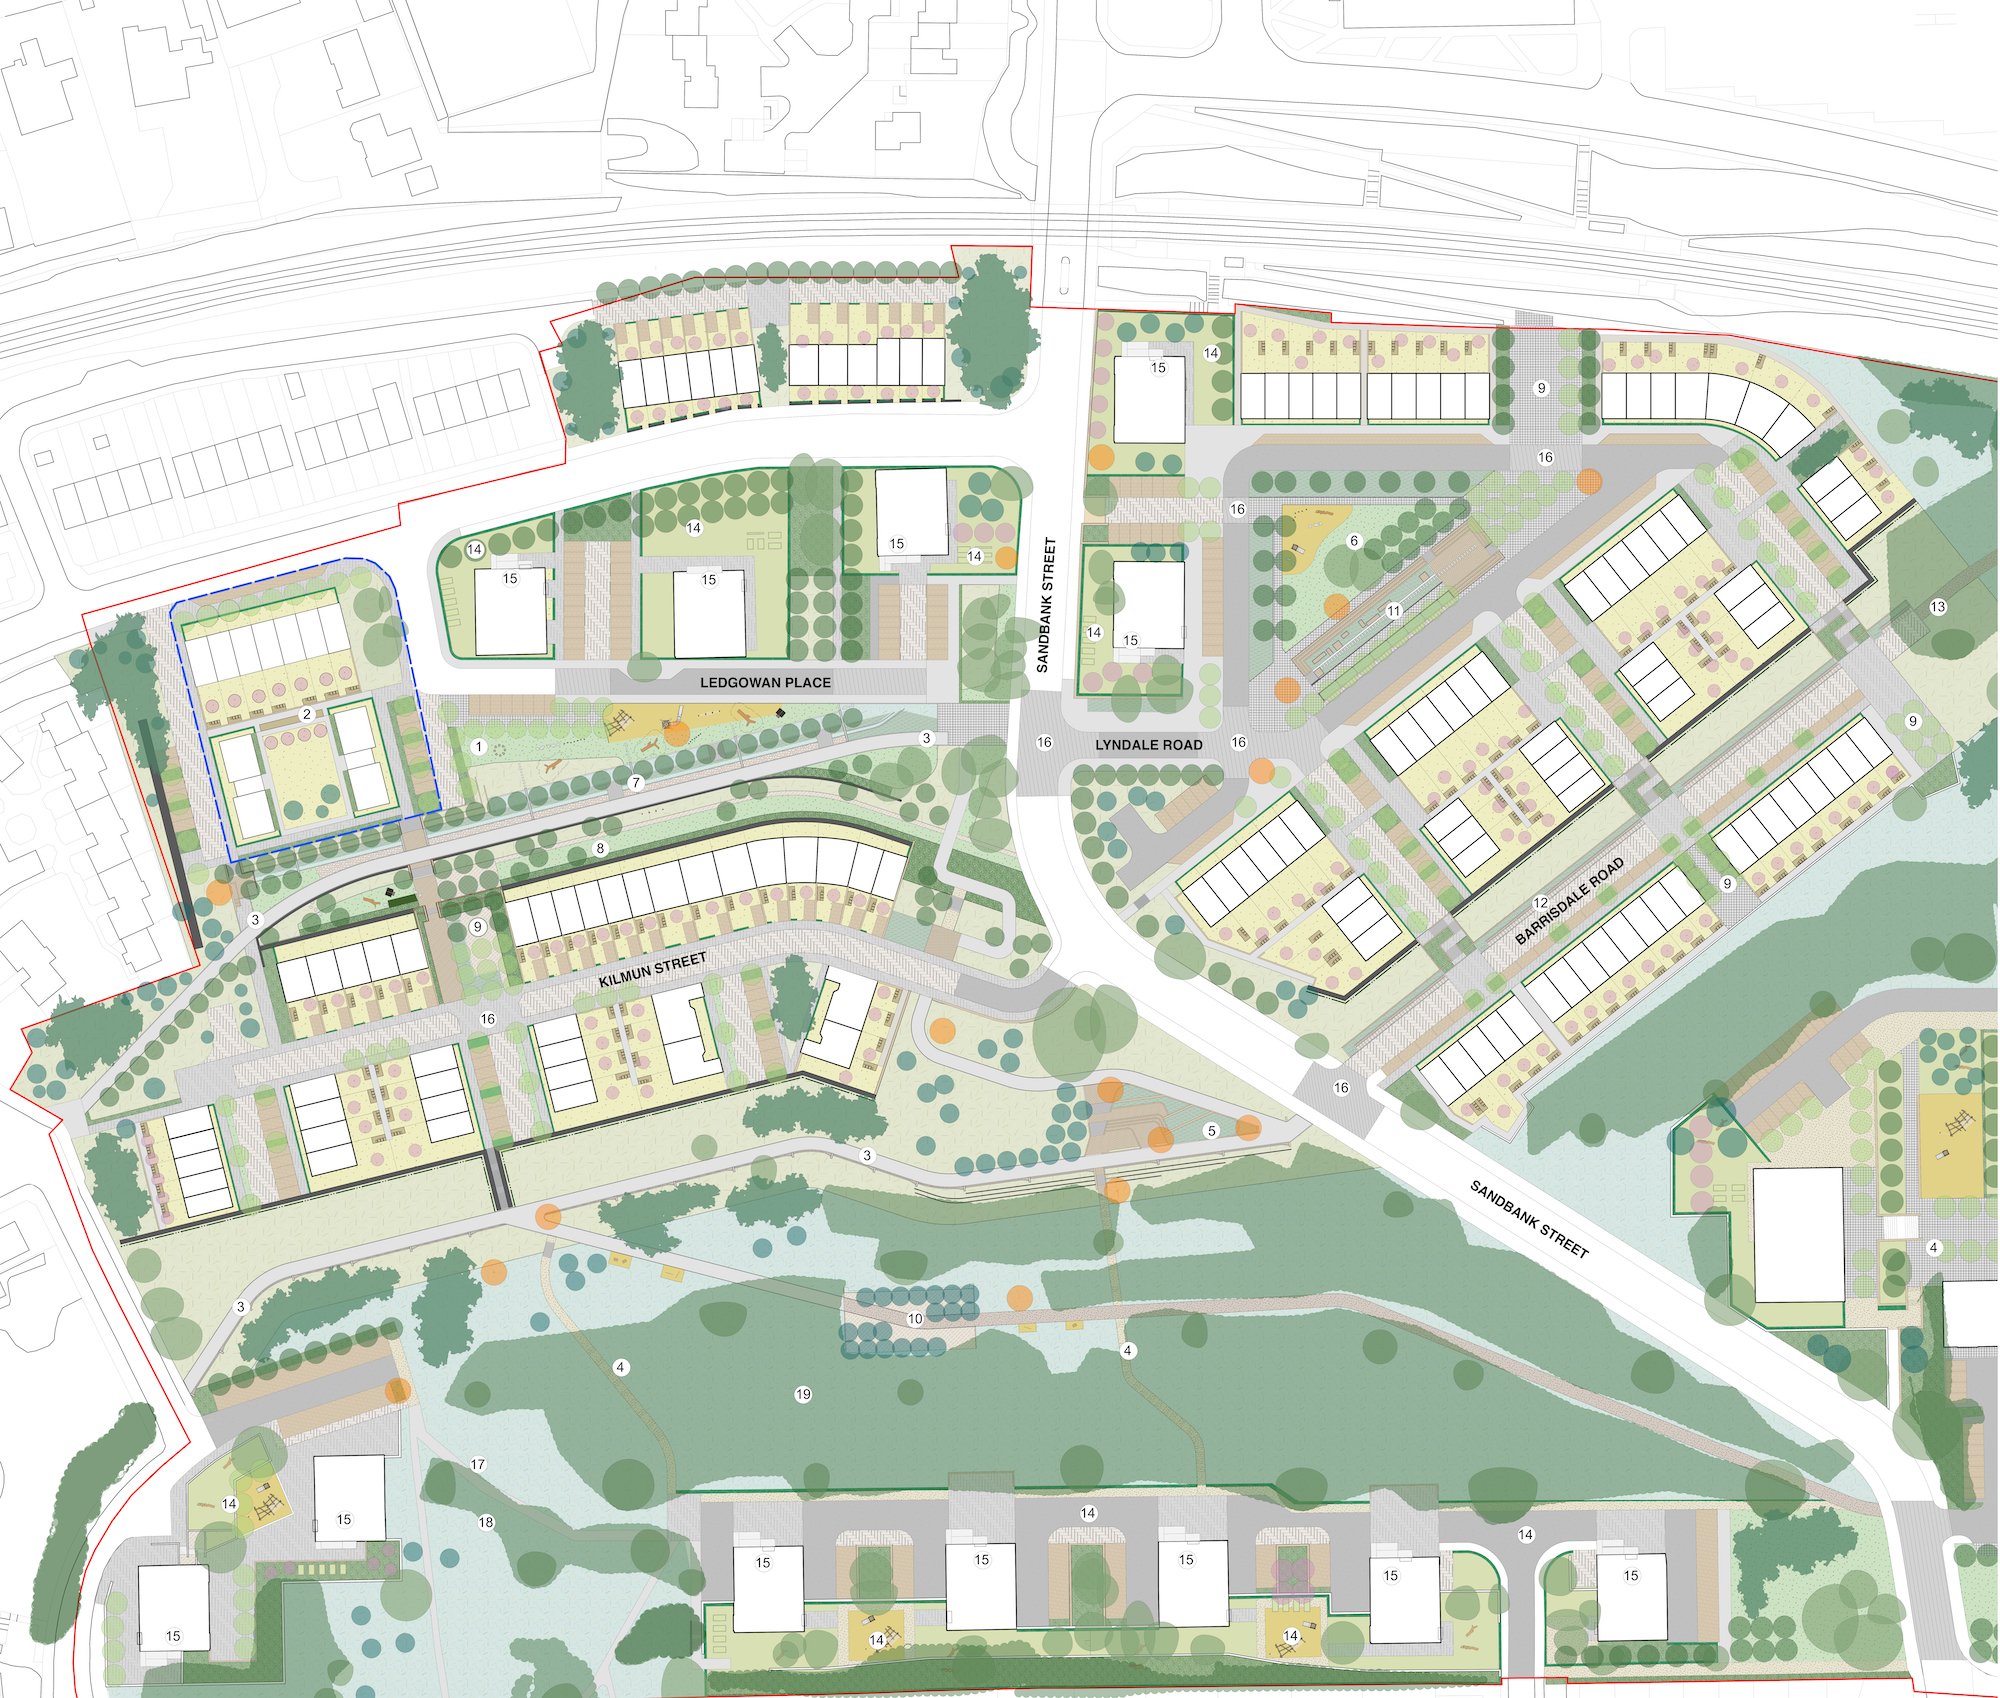 Masterplan showing potential future option with Ledgowan Hall removed / relocated